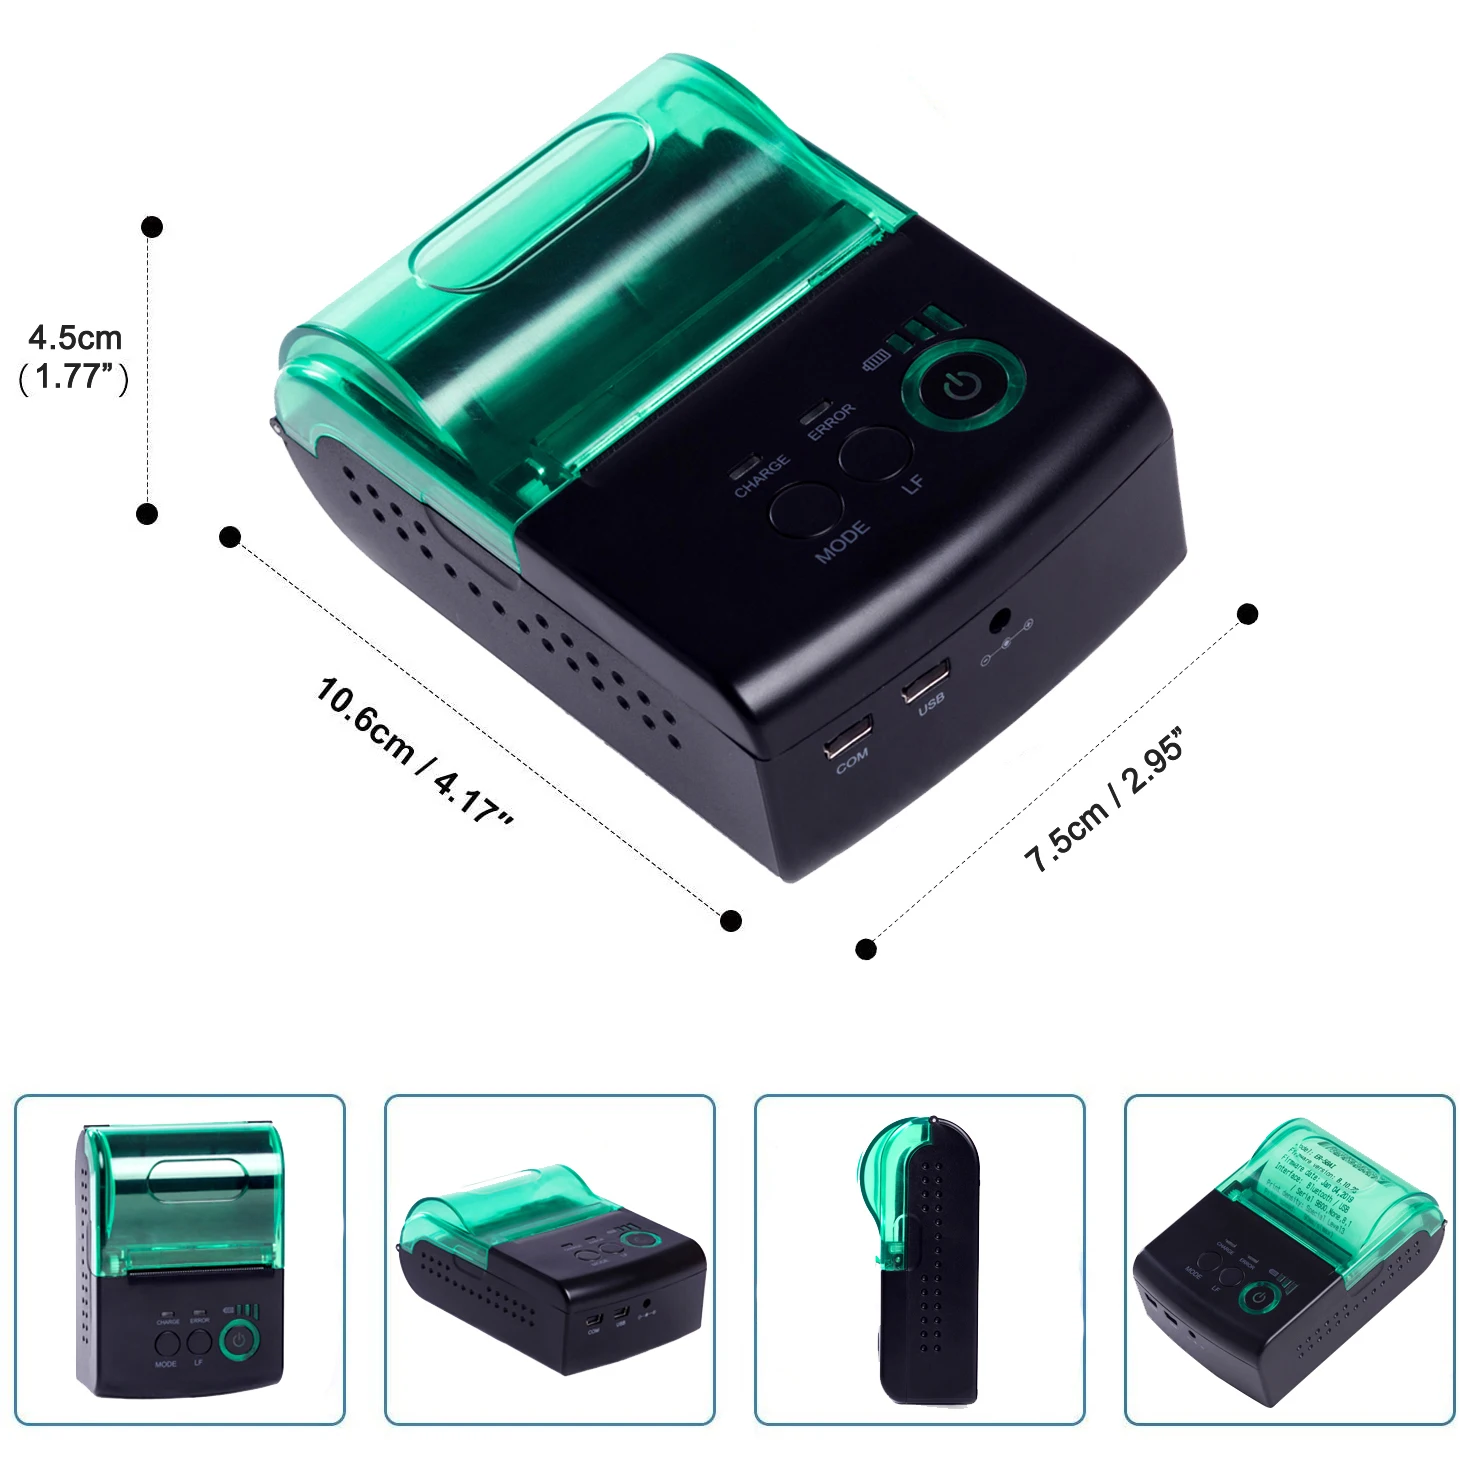 58mm Bluetooth Small Printer for Mobile Suppliers and Manufacturers China -  Vente en gros en usine - EastRoyce